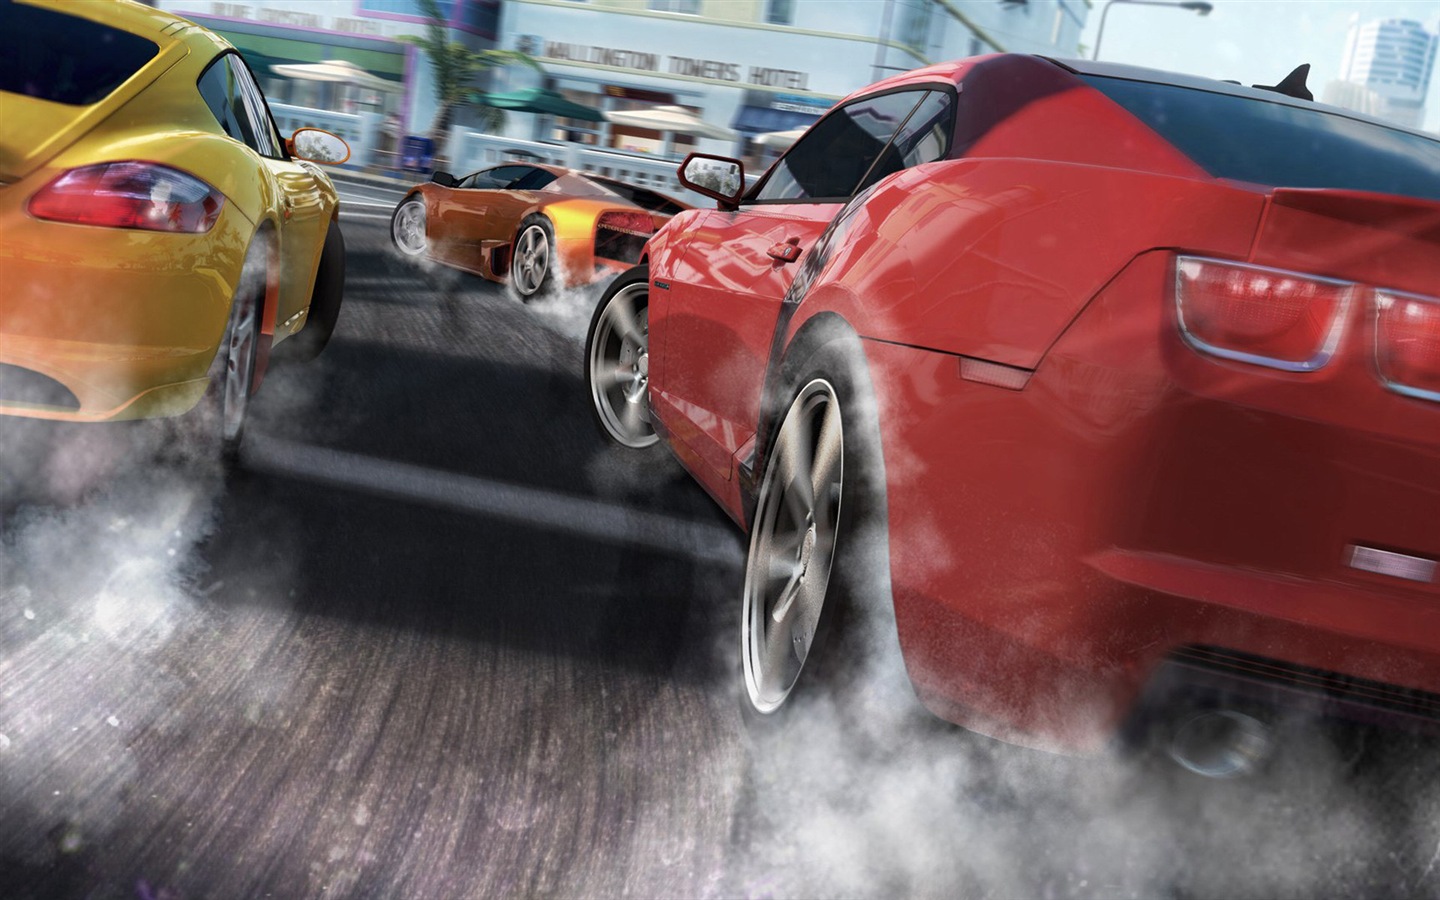 The Crew game HD wallpapers #6 - 1440x900